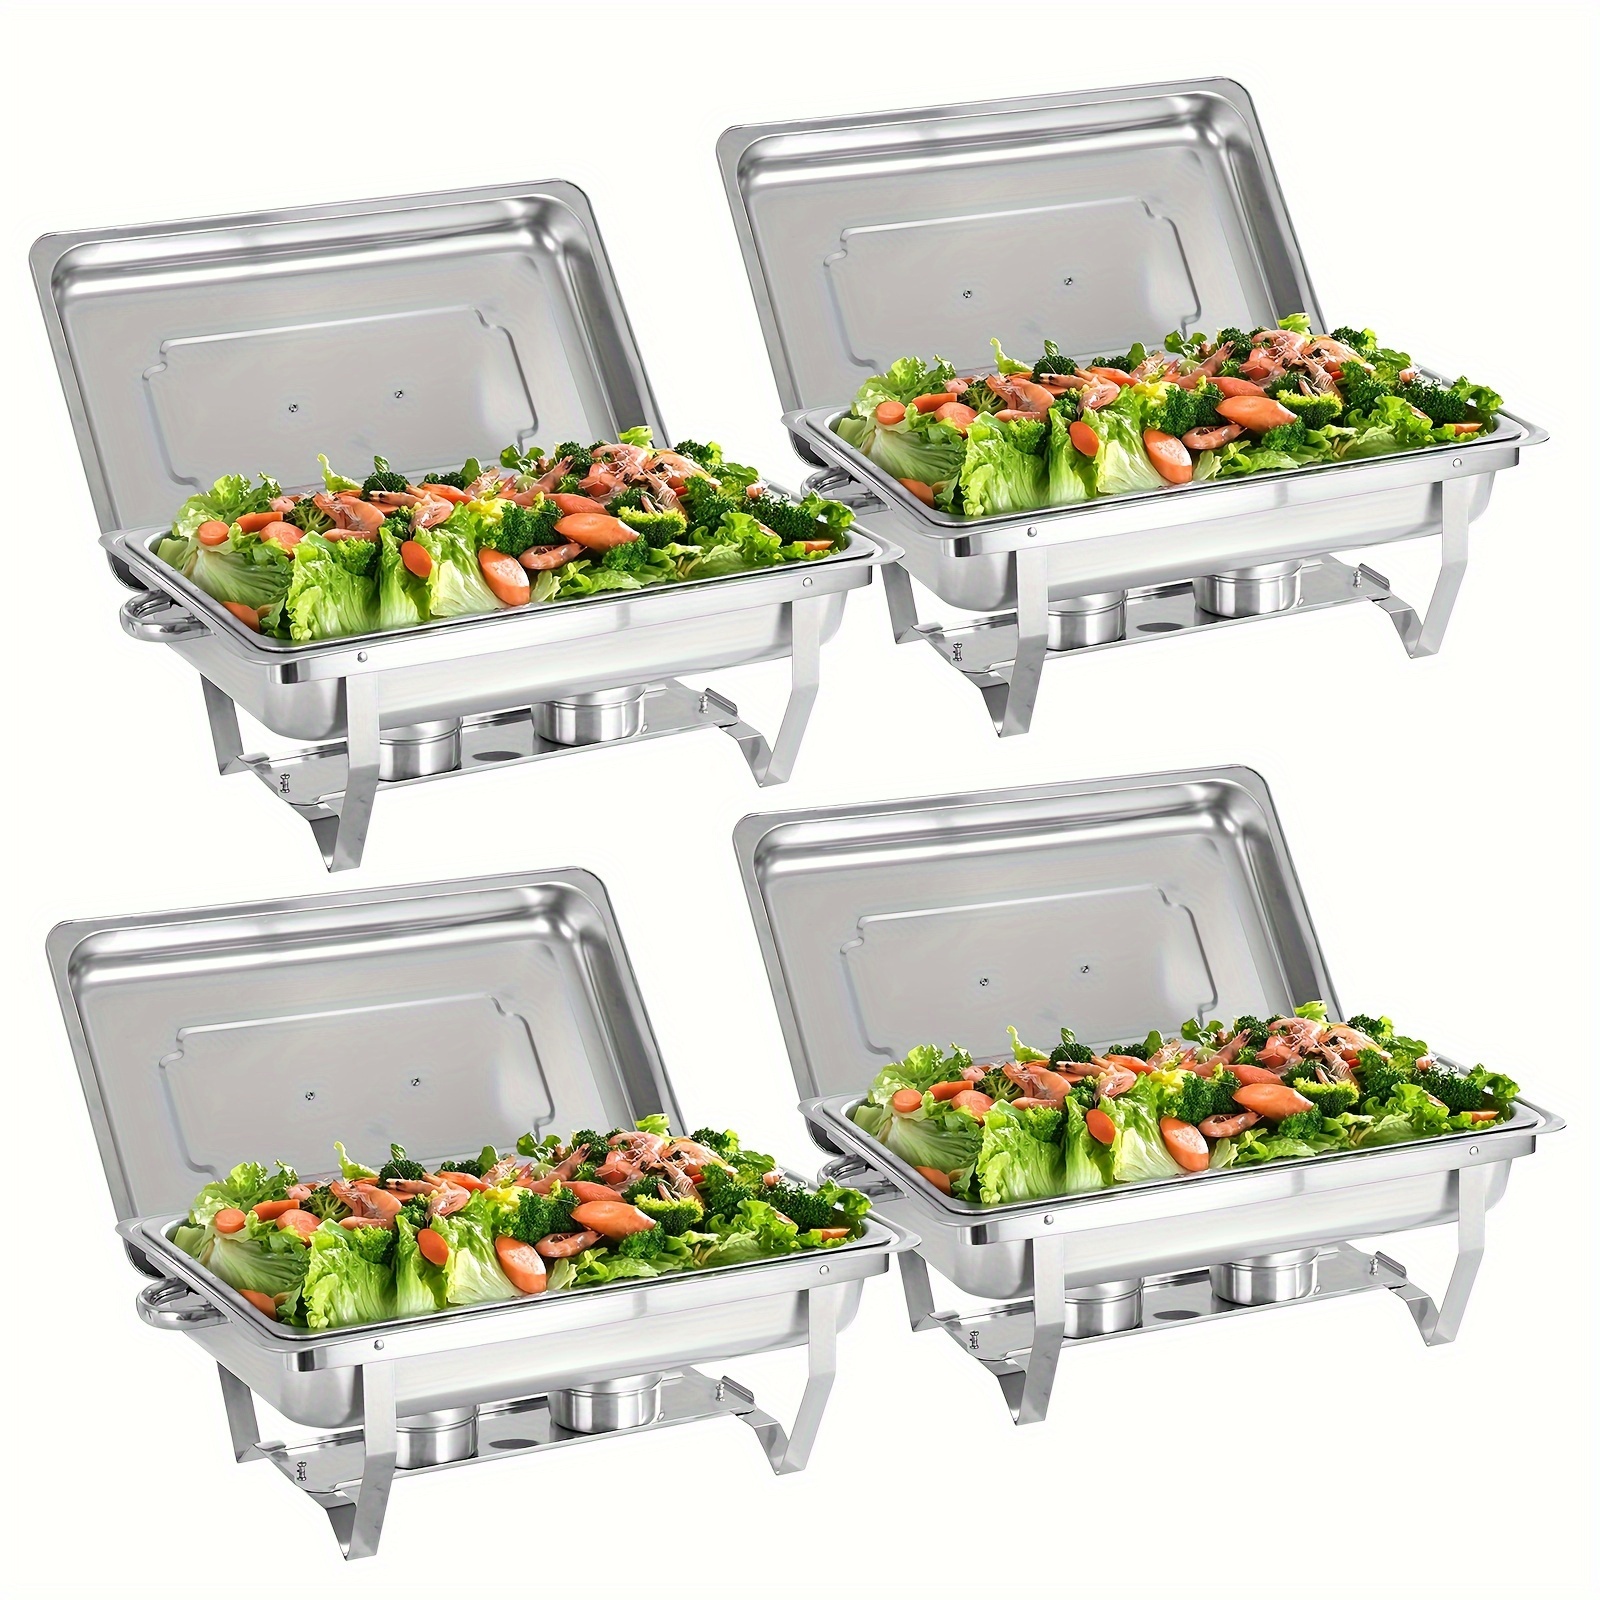 

Chafing Dish, Buffet Serving Utensils, Rectangle Stainless Steel Food Warmer Kit With Lids Food Pans And Fuel Holders For Restaurant Catering Parties Weddings